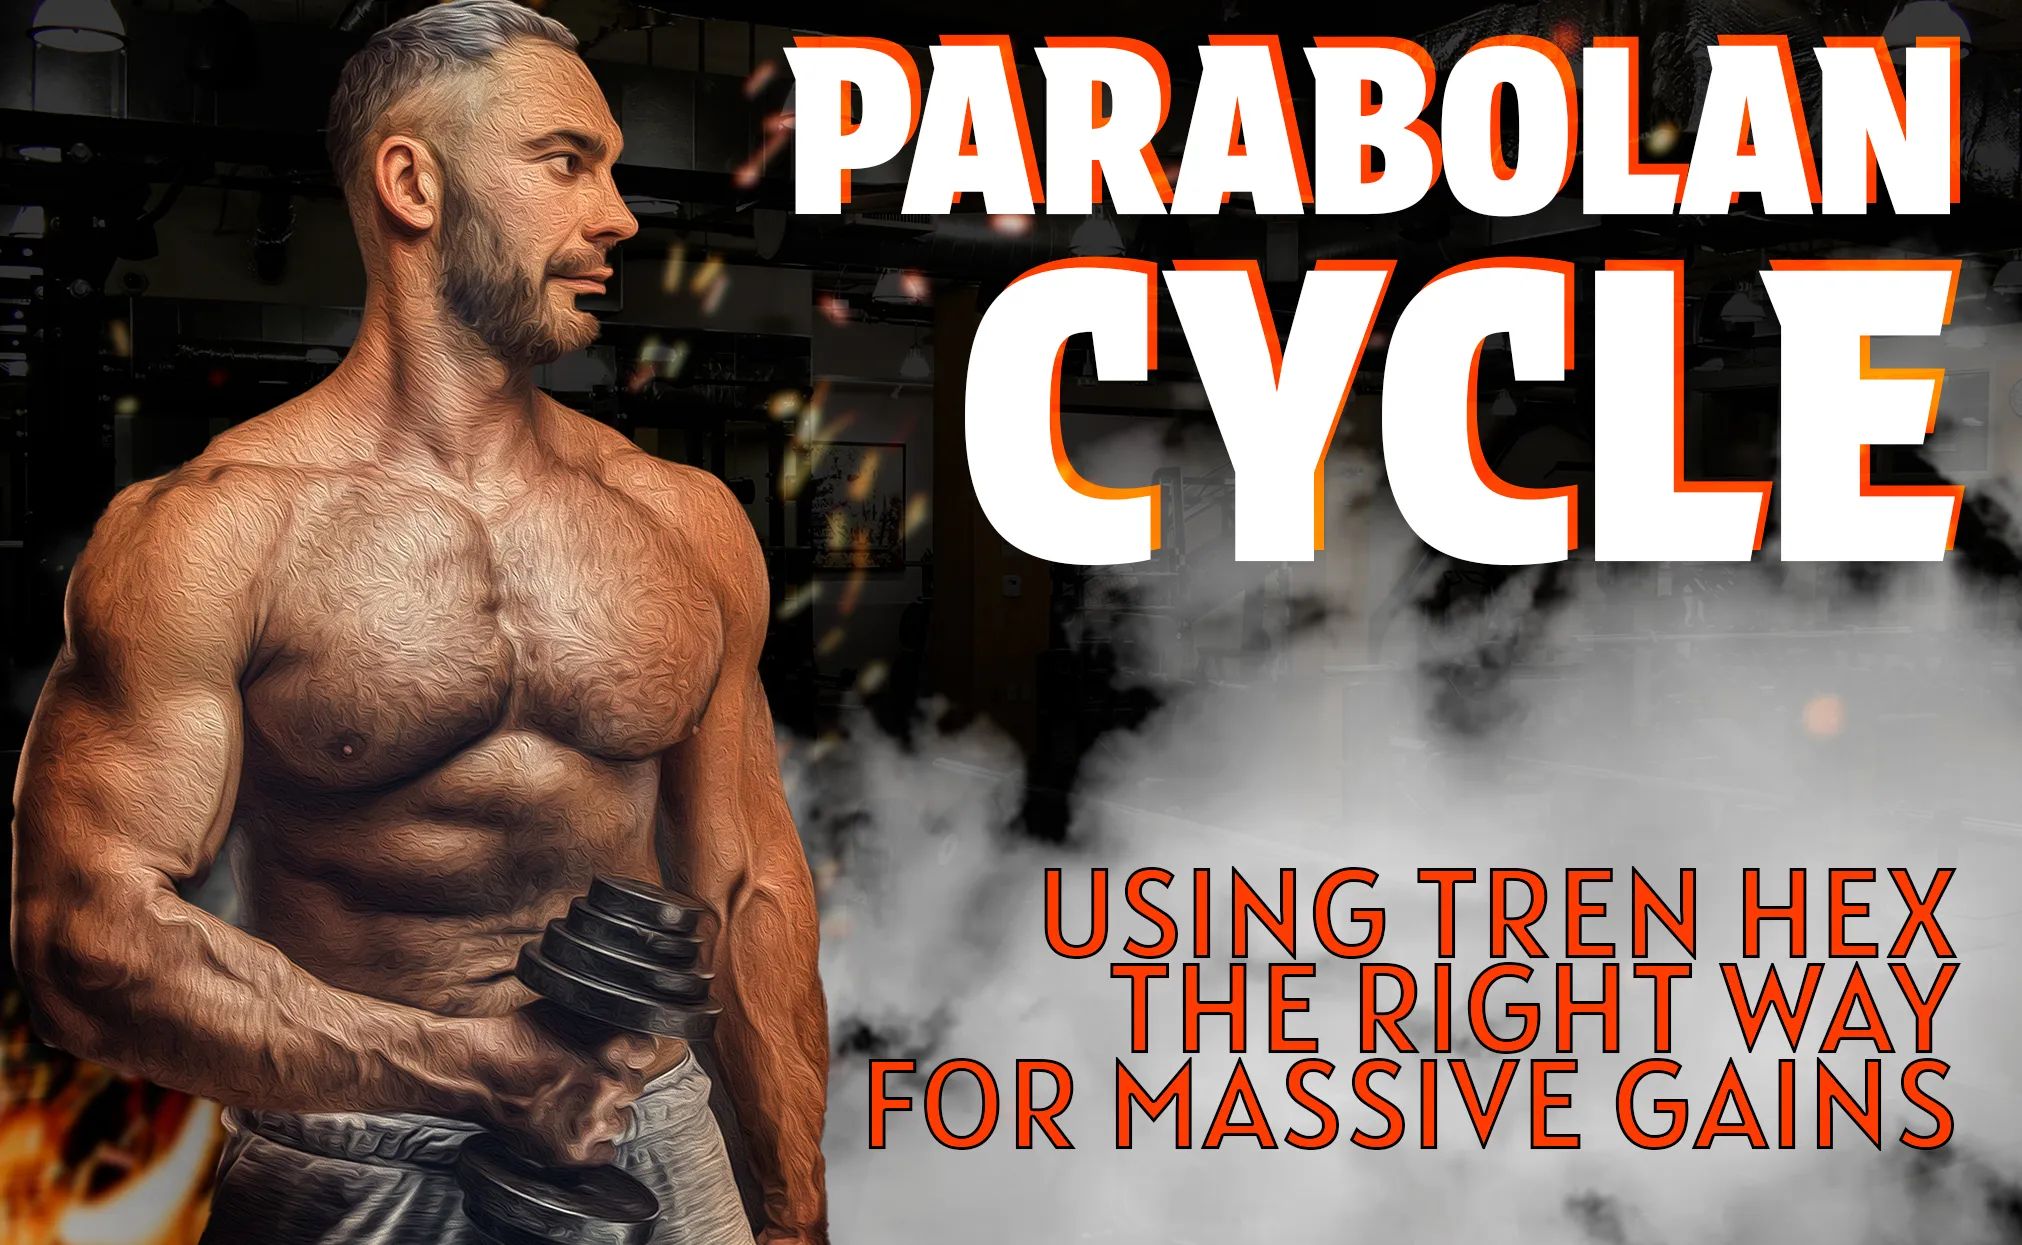 Parabolan Cycle – Using Tren Hex the Right Way for Massive Gains